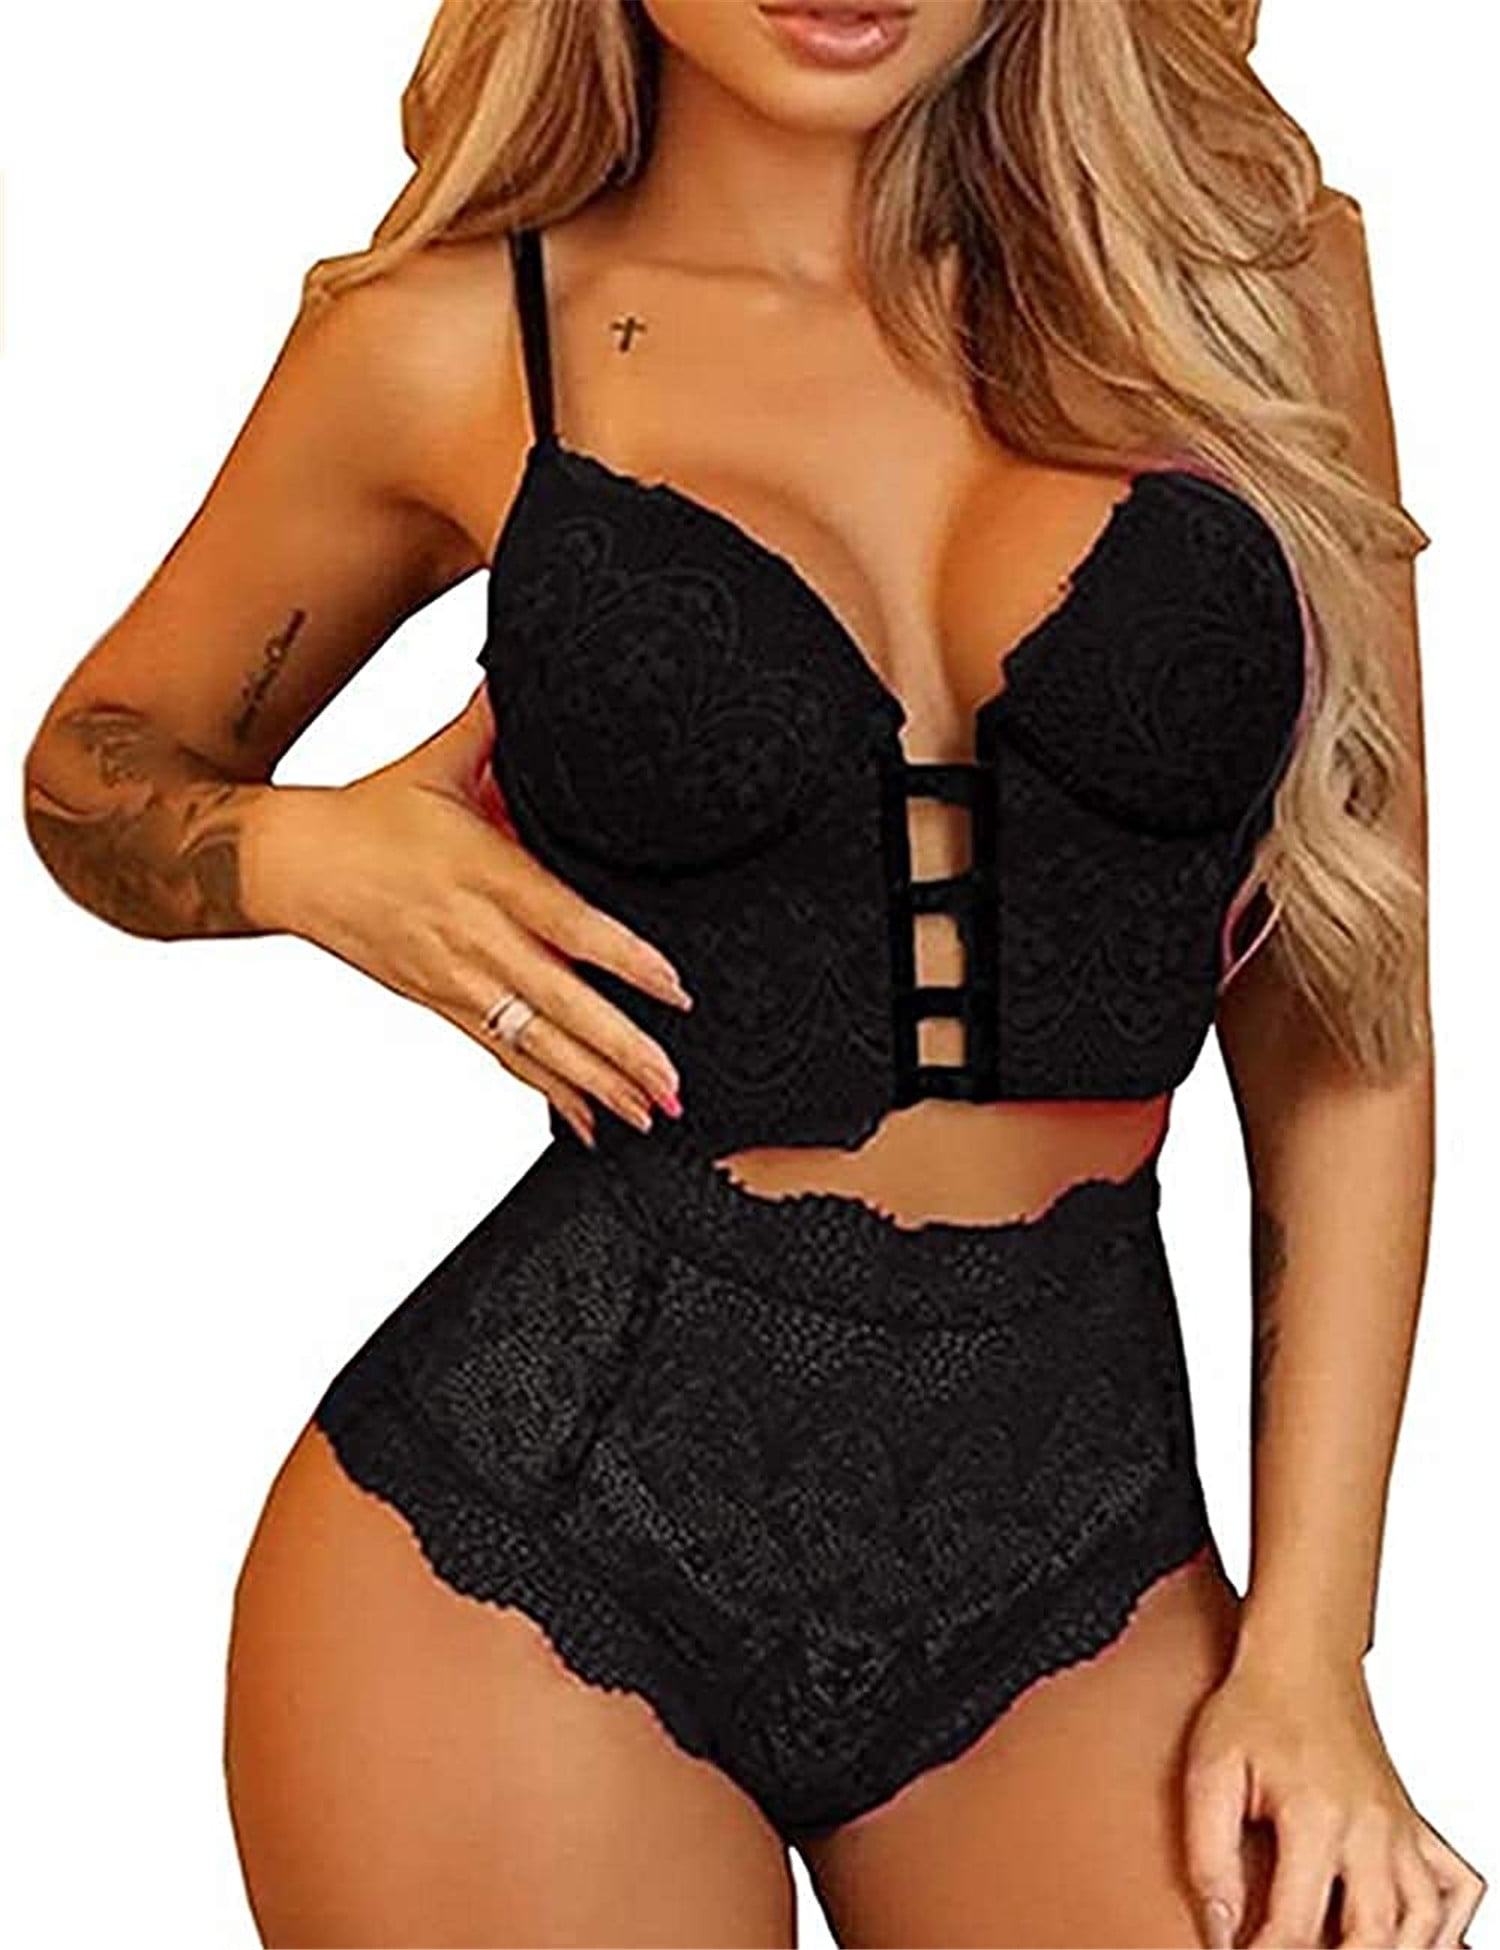 Plus Size Sheer Lace Lingerie Halter Bra and Thong Set Hollow Out Strappy Bodysuit for Women 2 Piece Outfit 